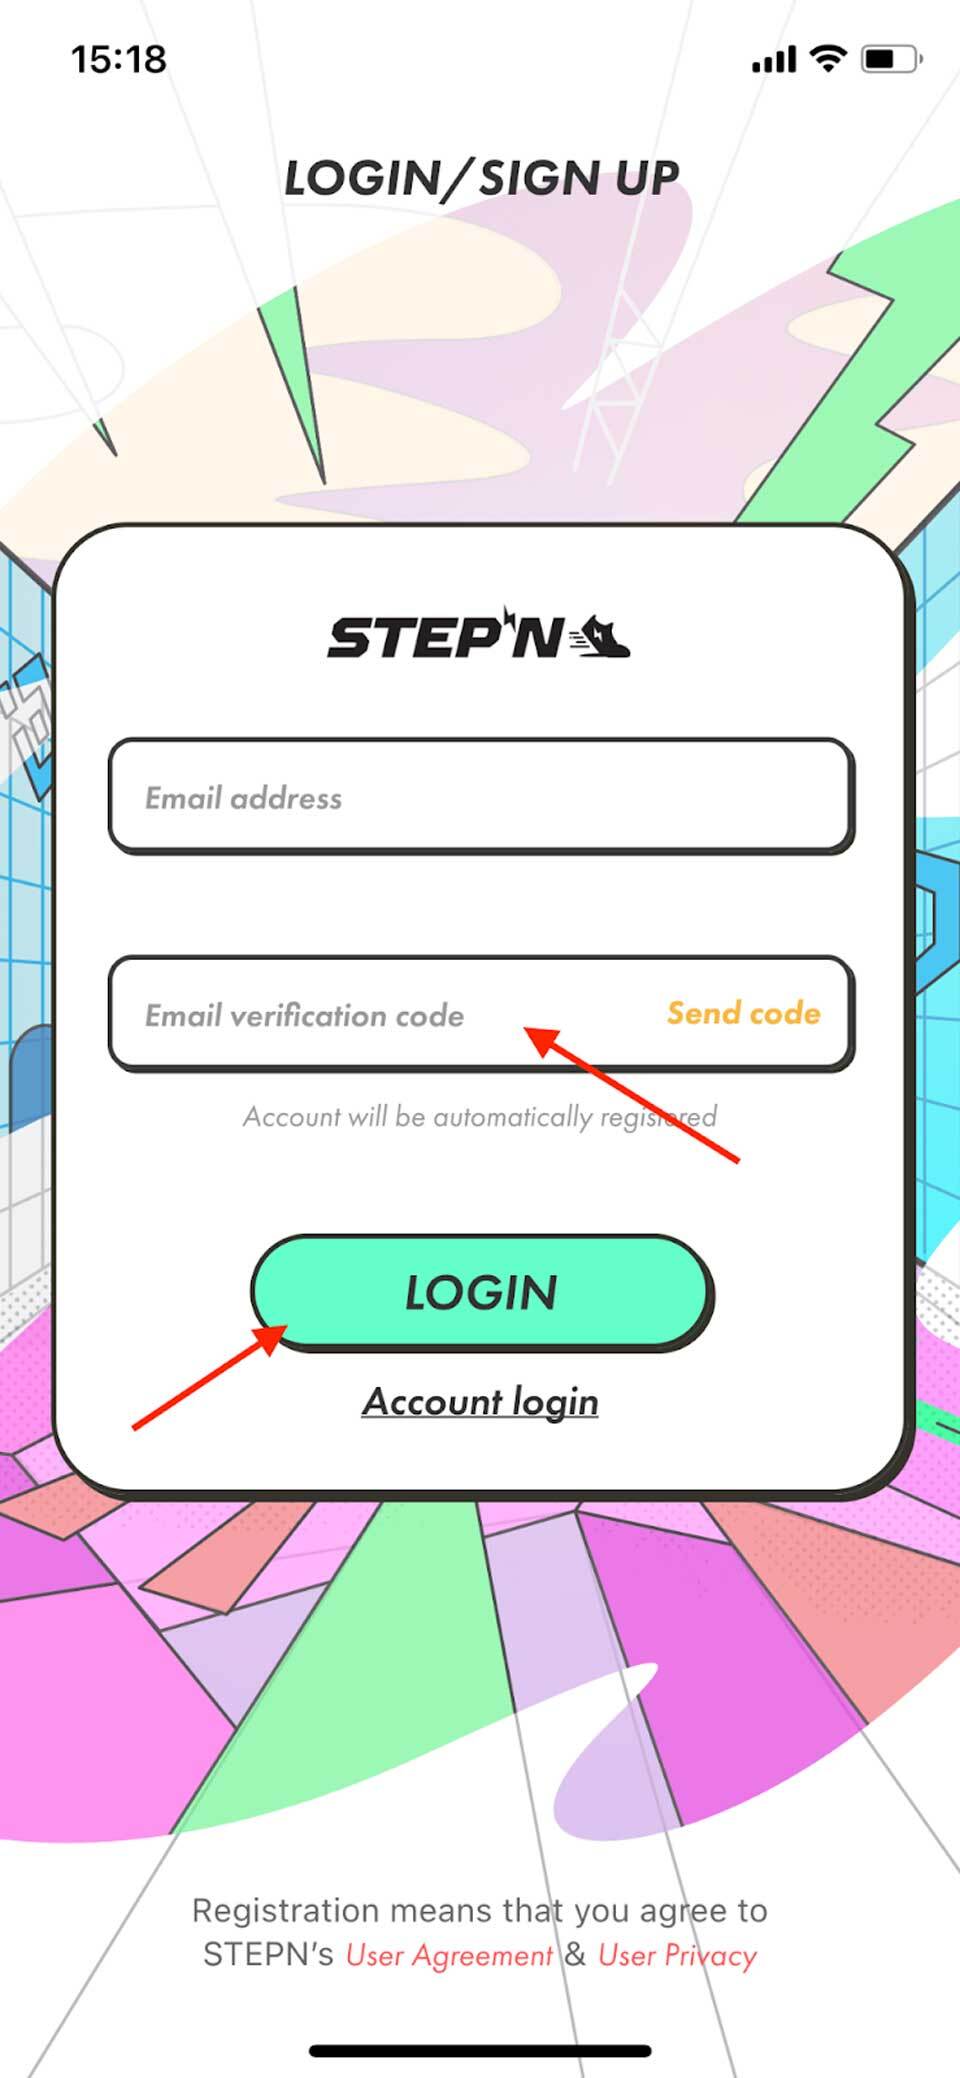 Email Verification Code